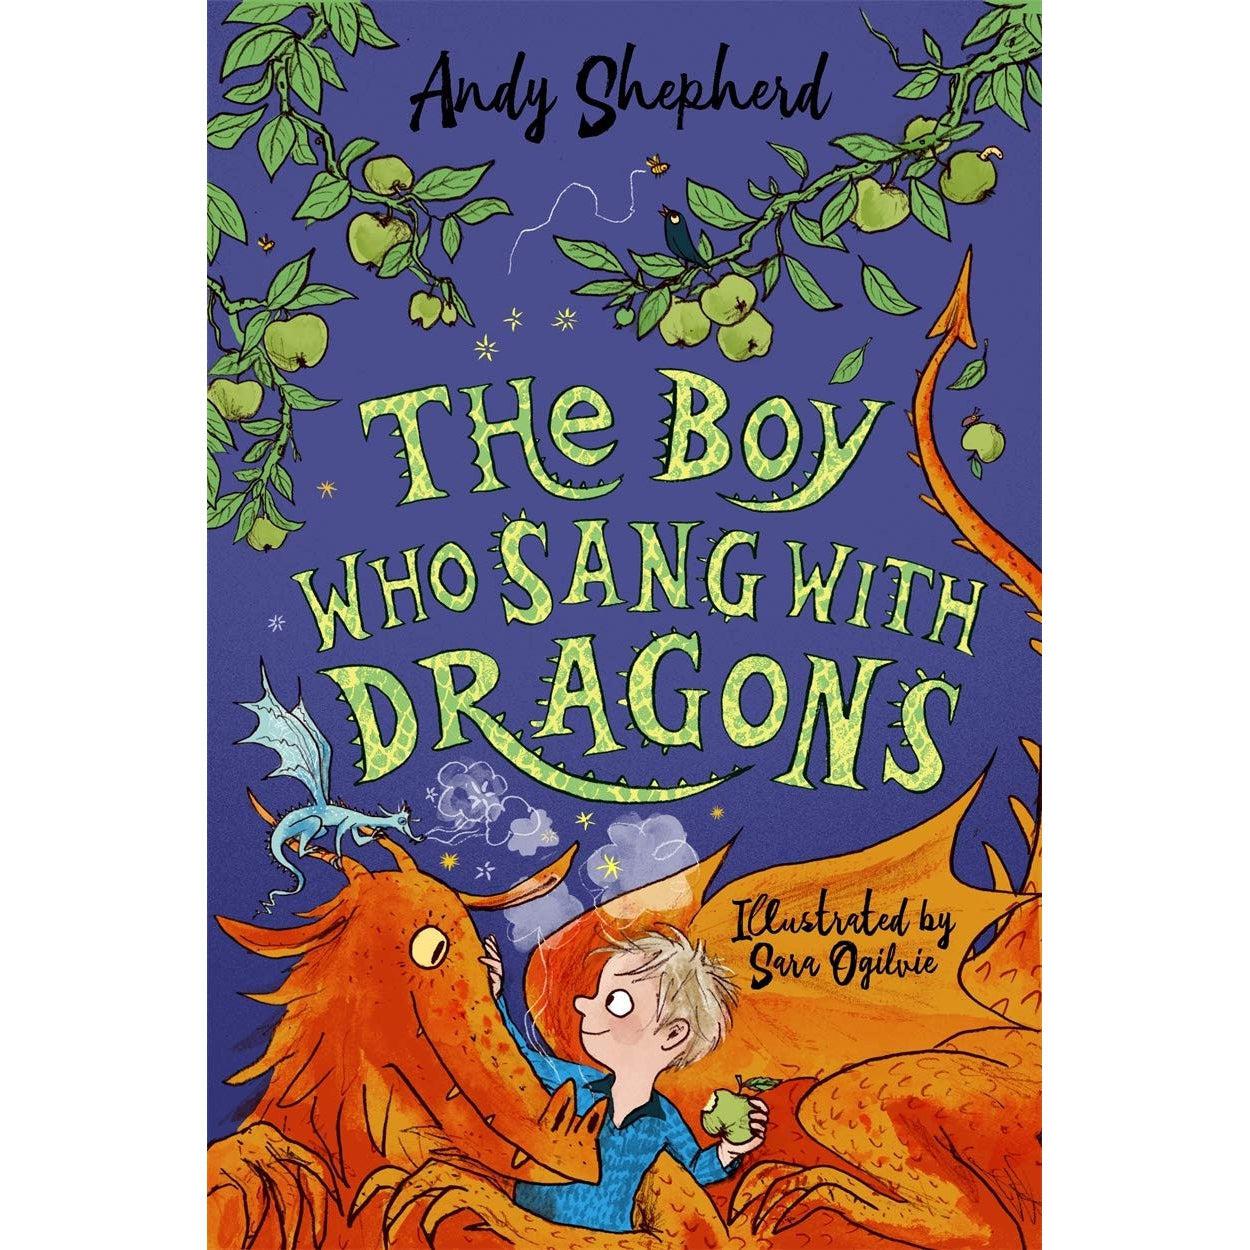 The Boy Who Sang With Dragons (The Boy Who Grew Dragons 5)